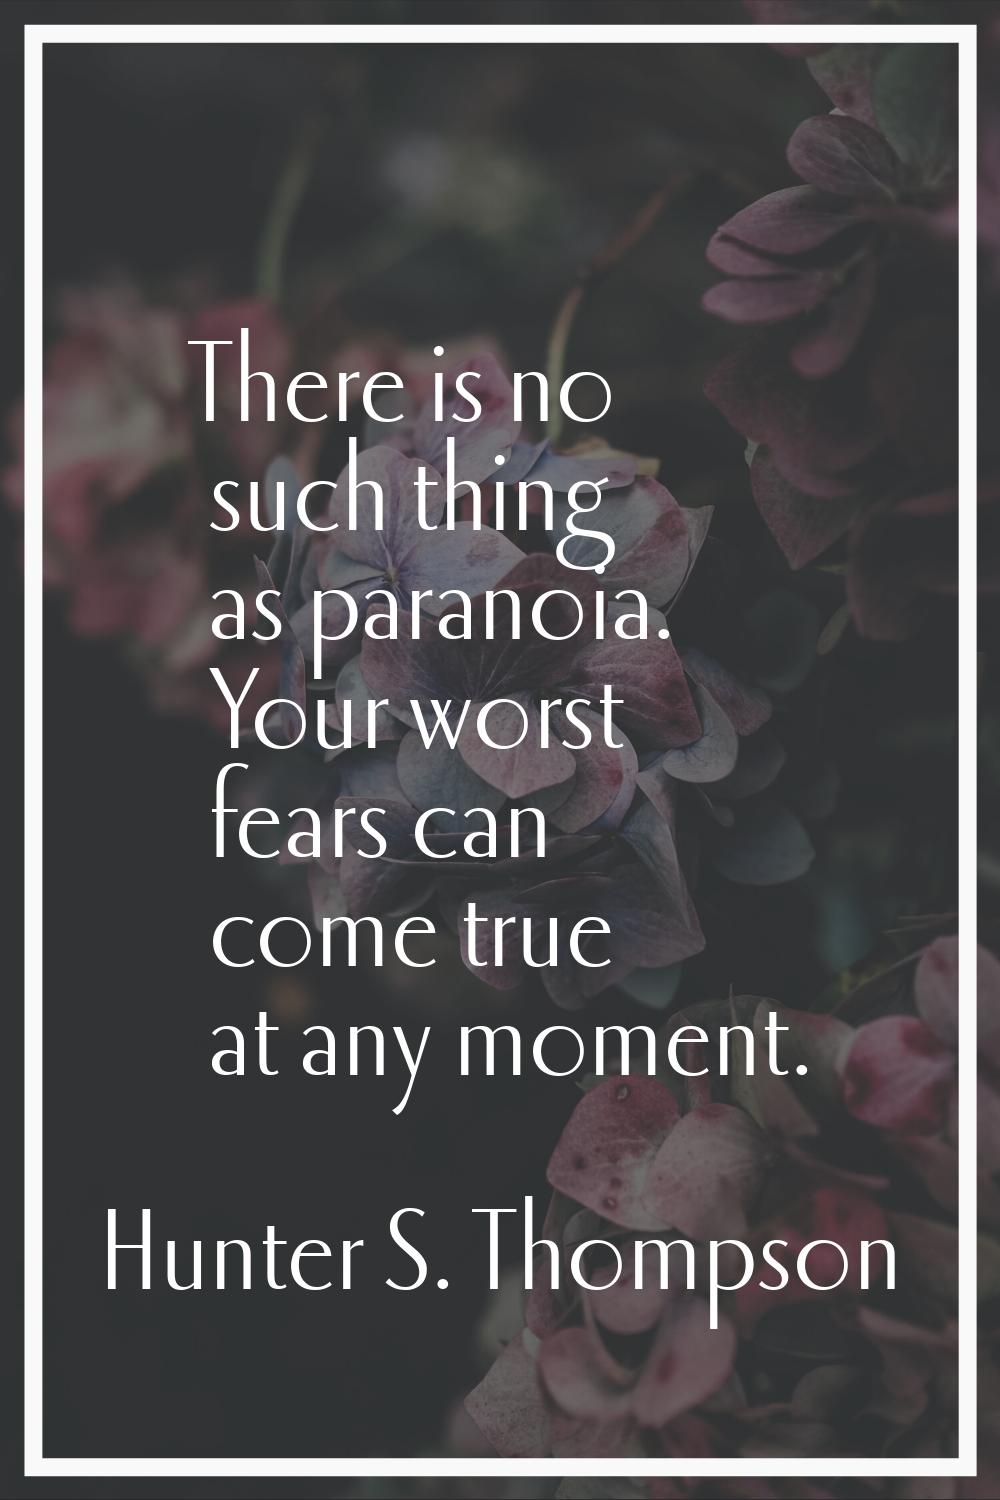 There is no such thing as paranoia. Your worst fears can come true at any moment.